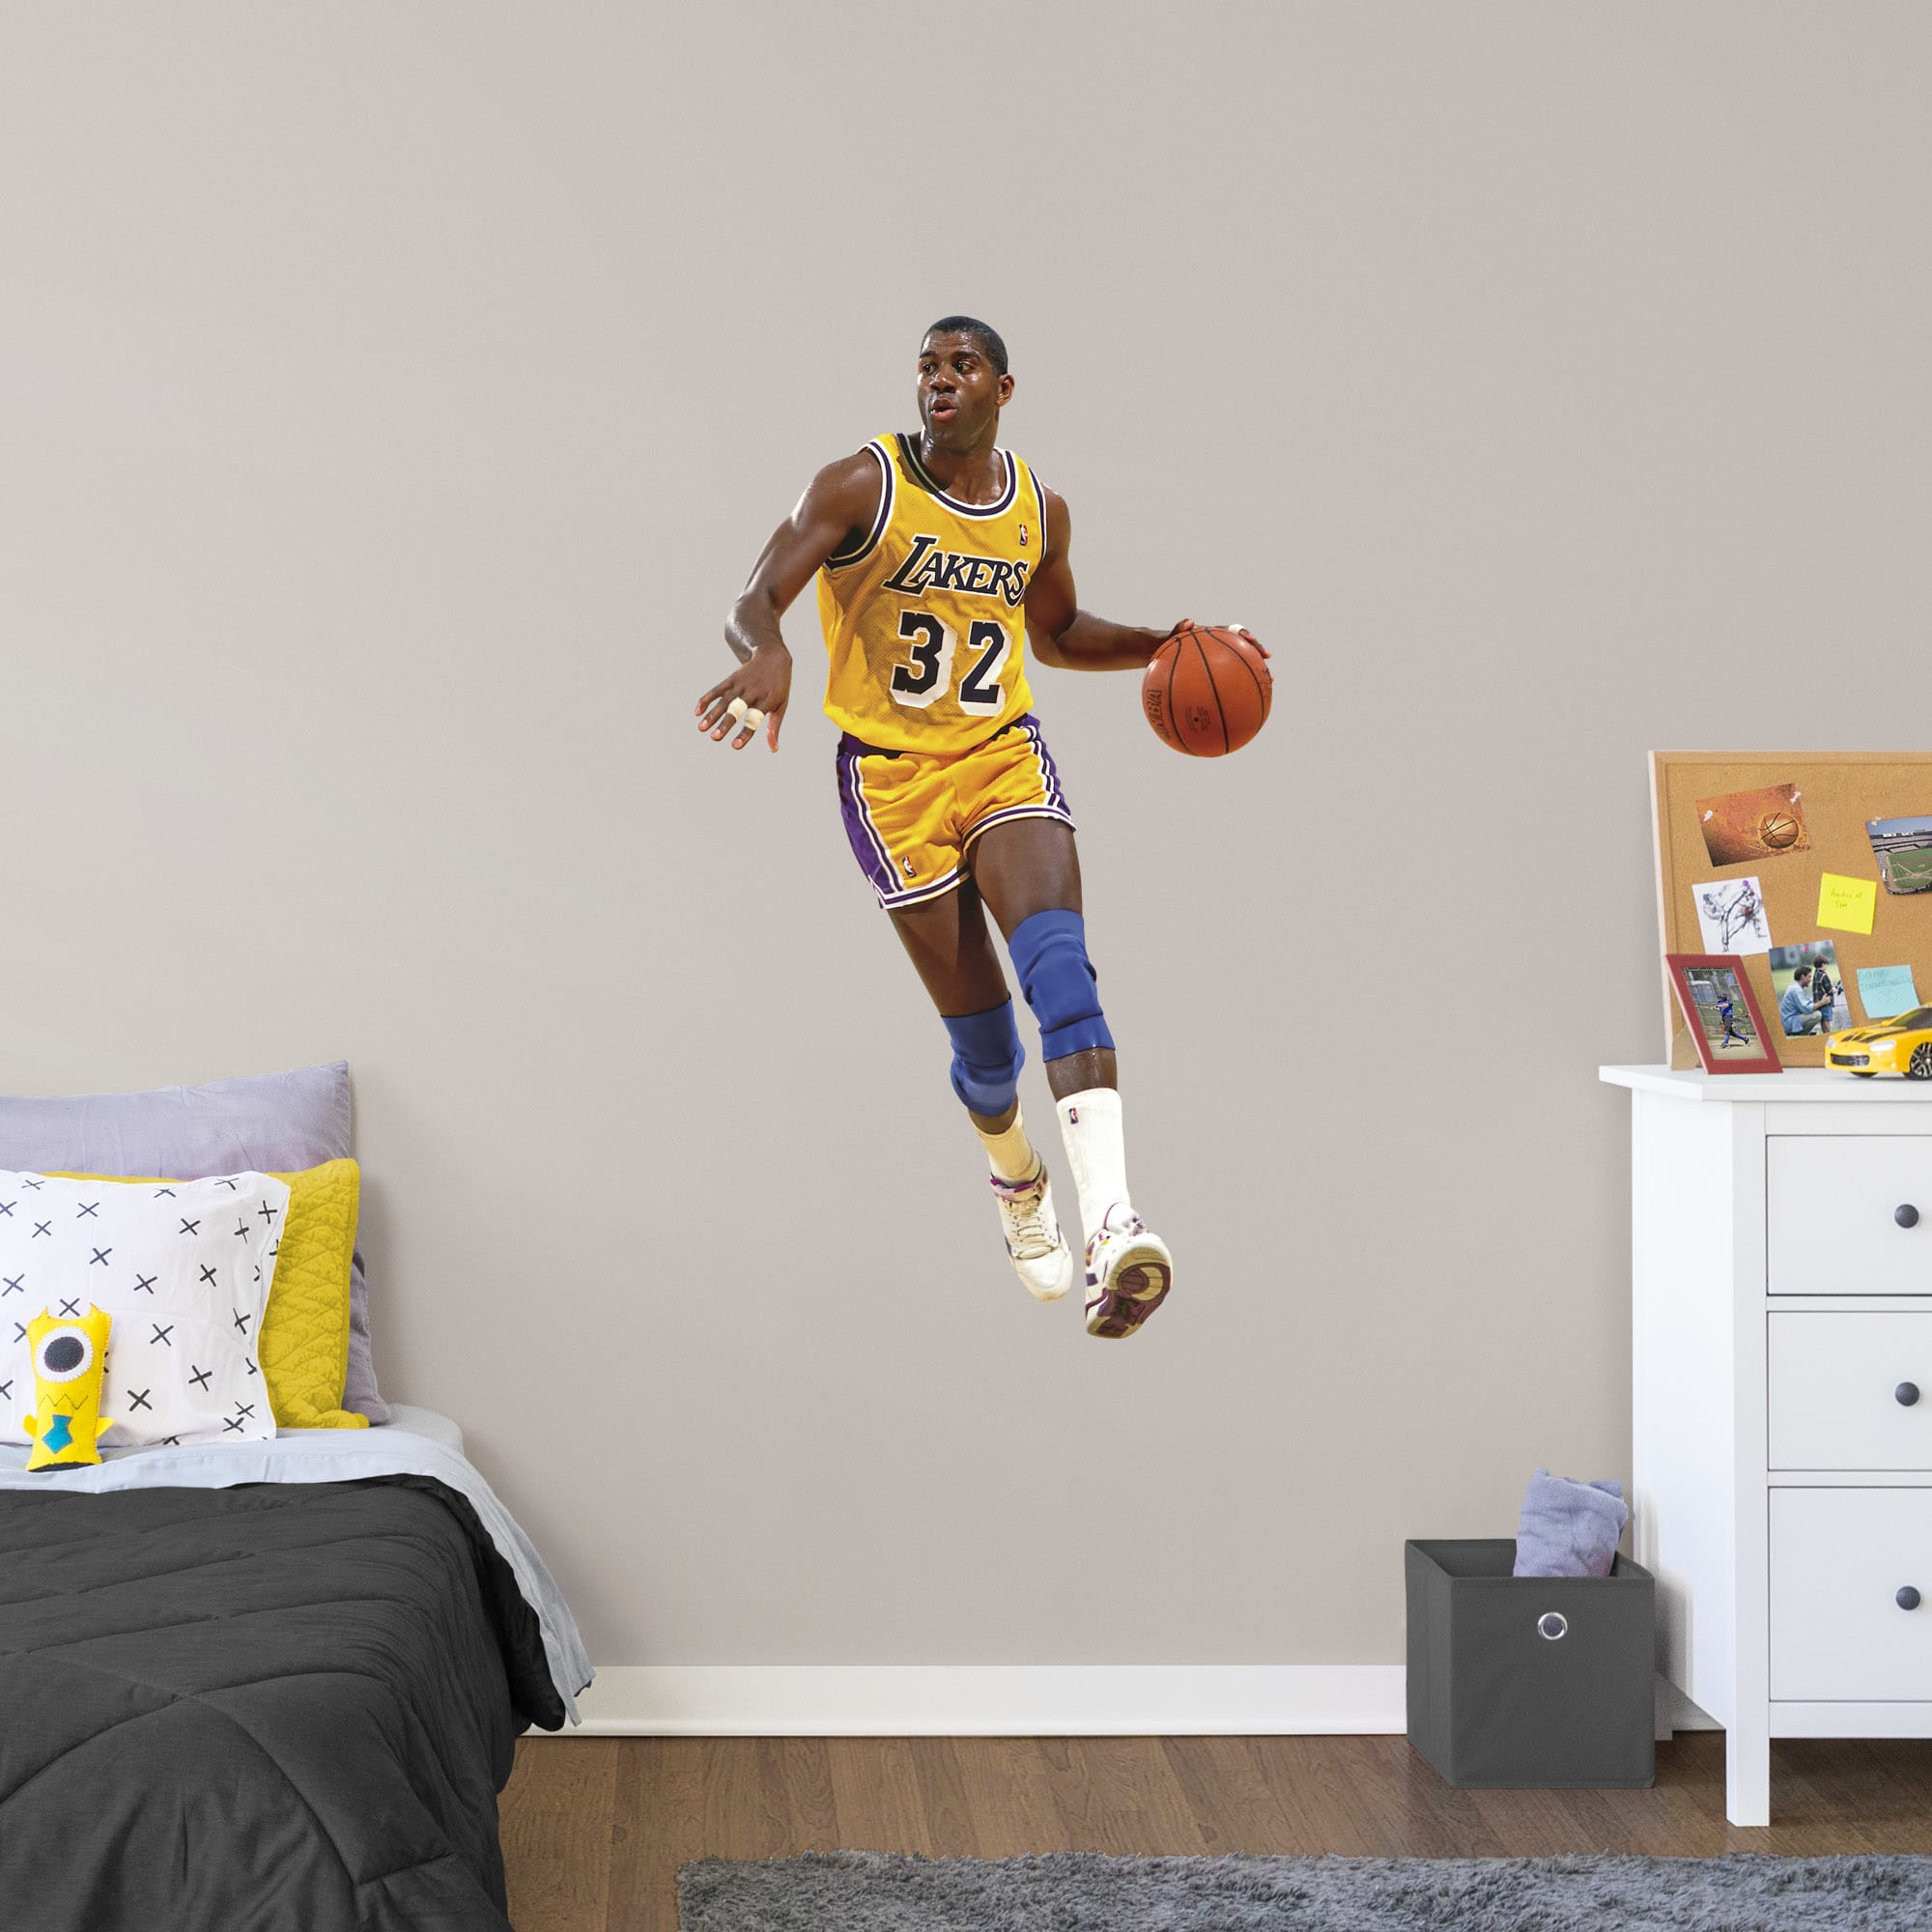 Magic Johnson for Los Angeles Lakers - Officially Licensed NBA Removable Wall Decal Giant Athlete + 2 Decals (29"W x 51"H) by Fa